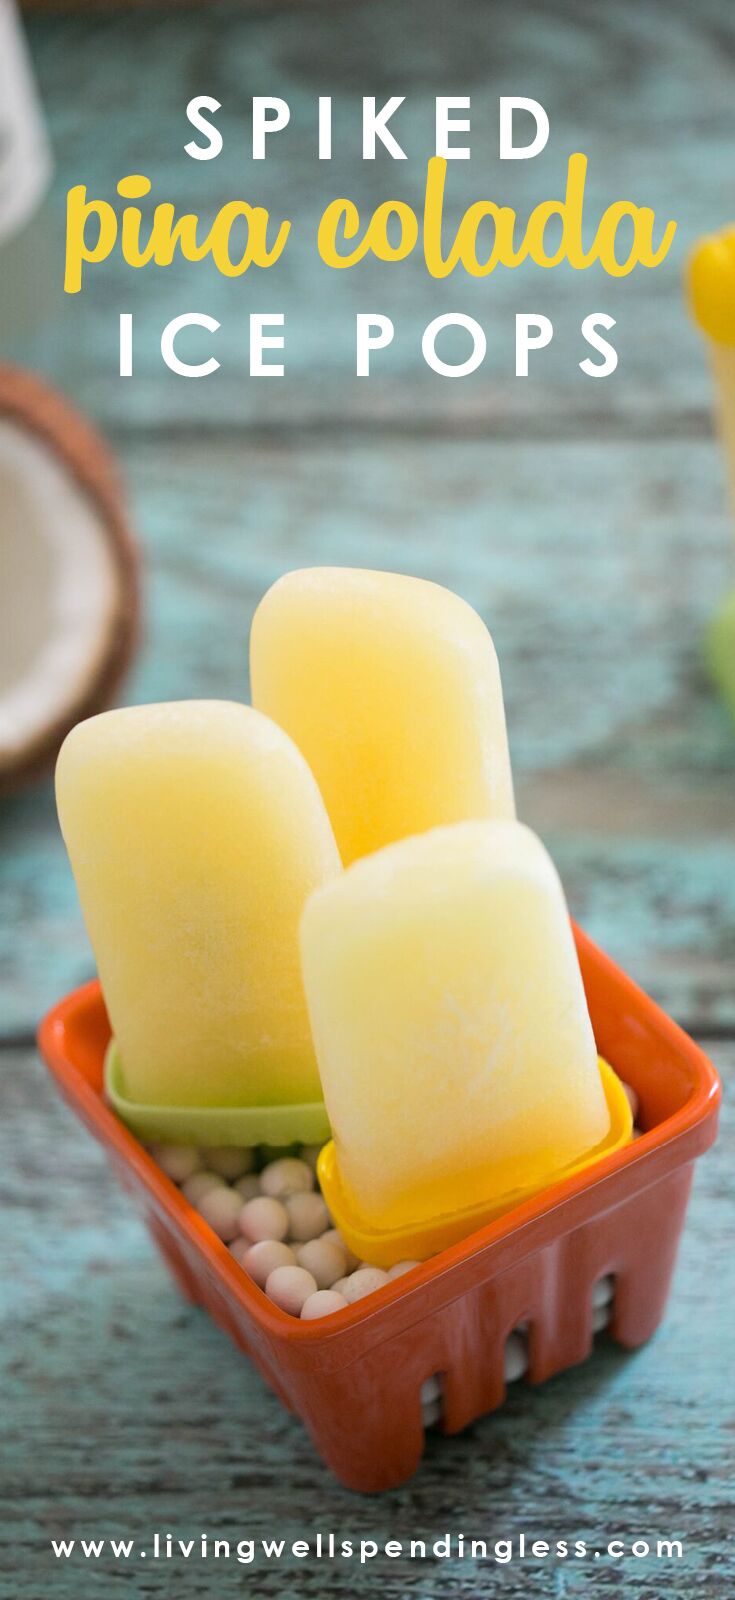 Light Pina Colada Popsicles | Summer Desserts | Popsicle Recipe | Food Made Simple | 3 Ingredient Dessert | Desserts with a Twist